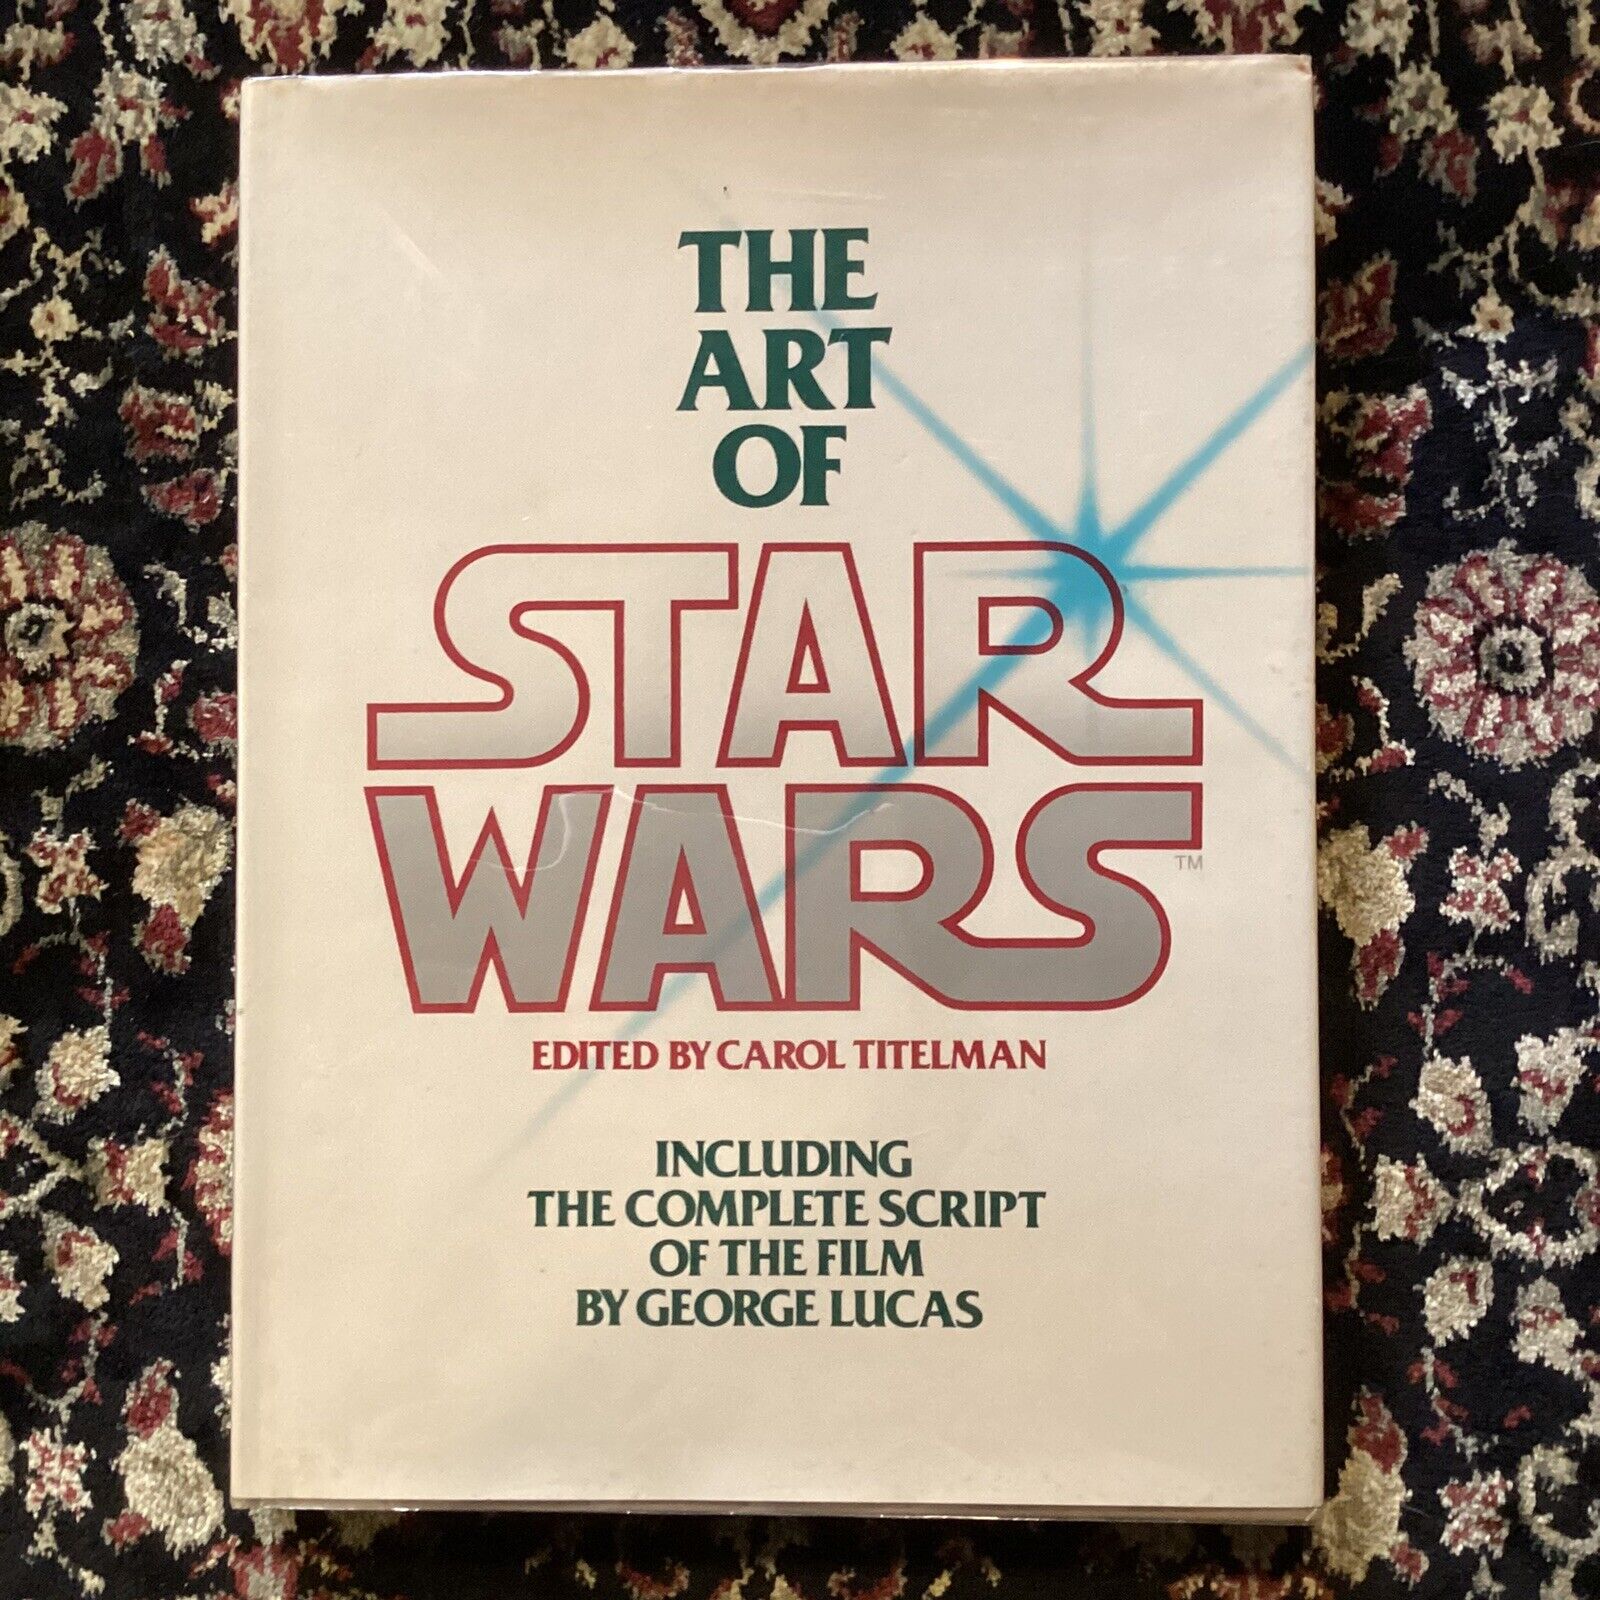 The Art of Star Wars by Carol Titelman | First Edition, Hardcover (1979)